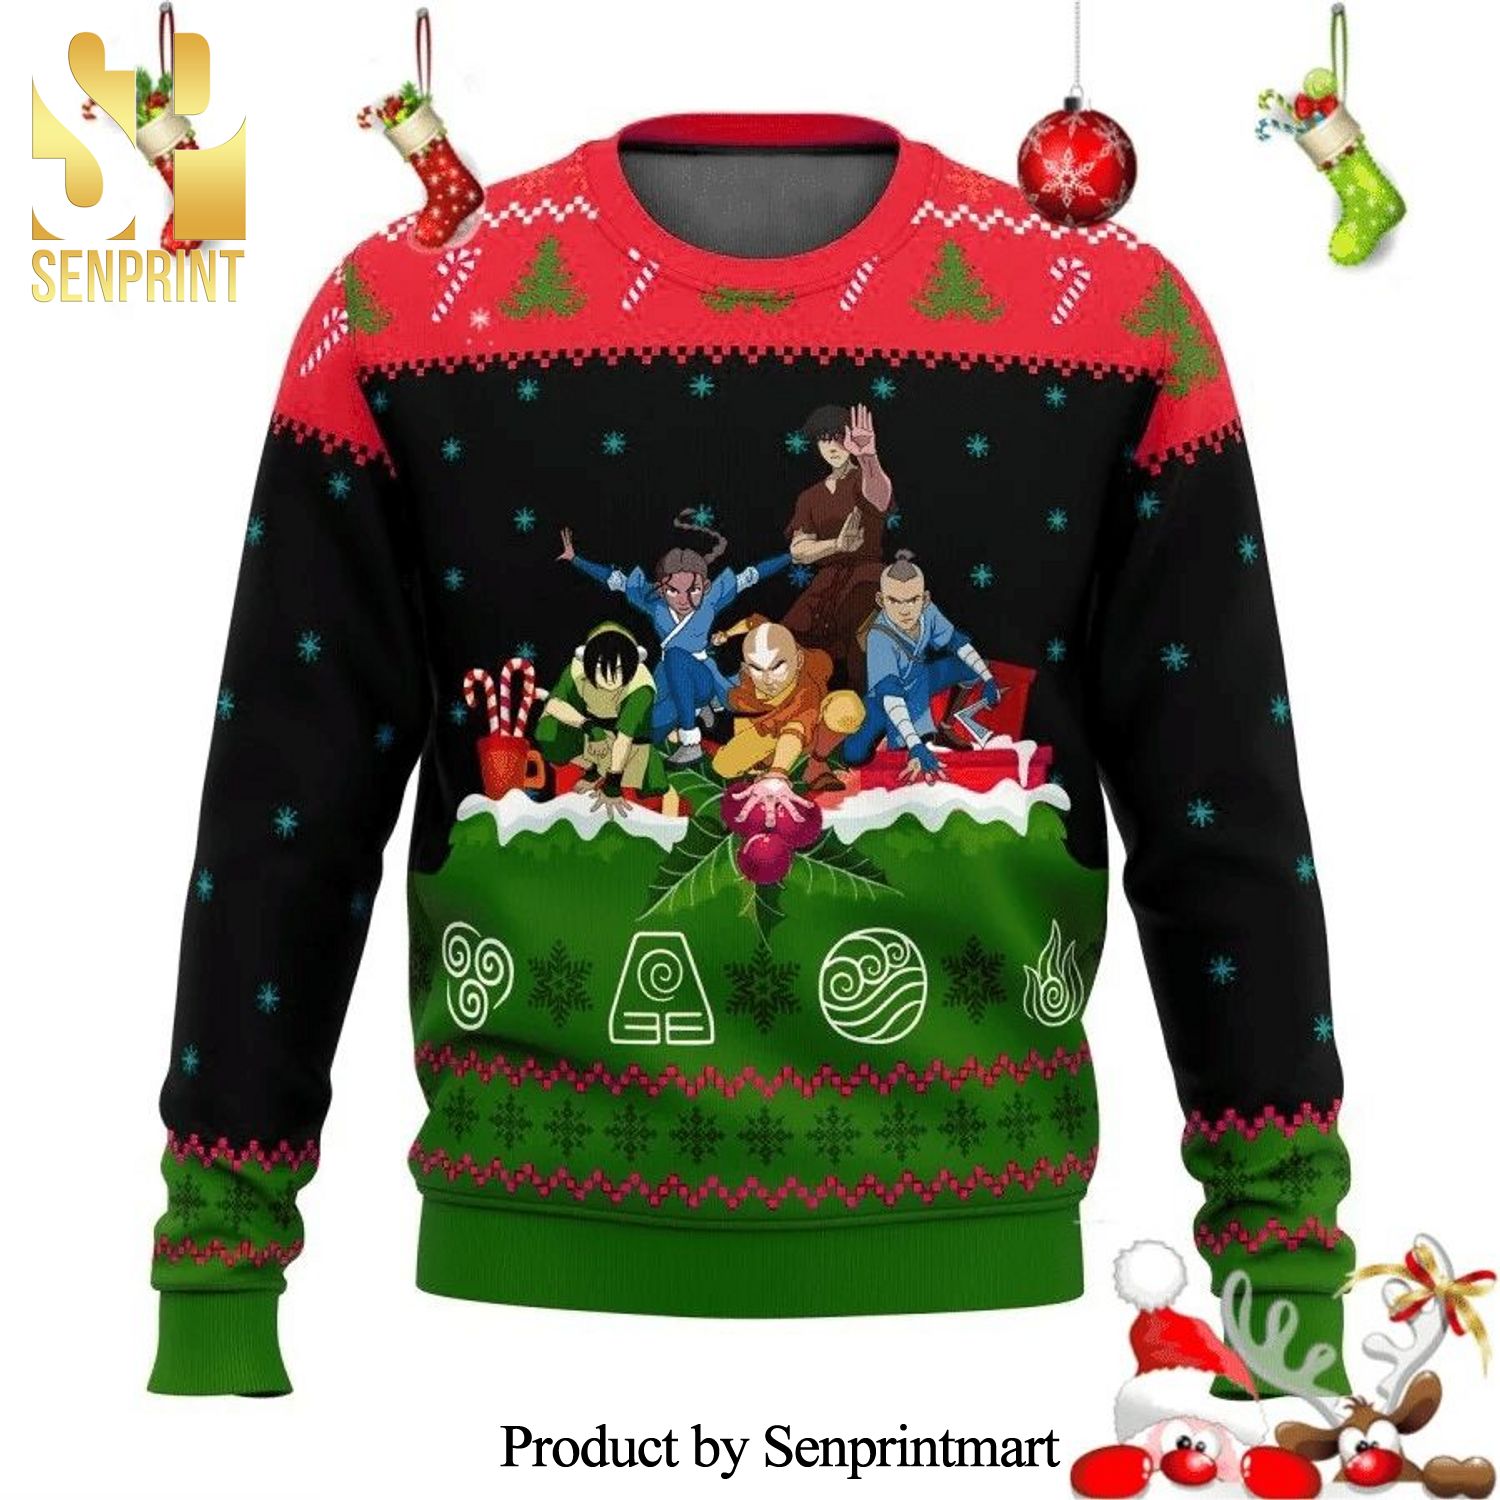 Avatar The Last Airbender Knitted Ugly Christmas Sweater – BF31